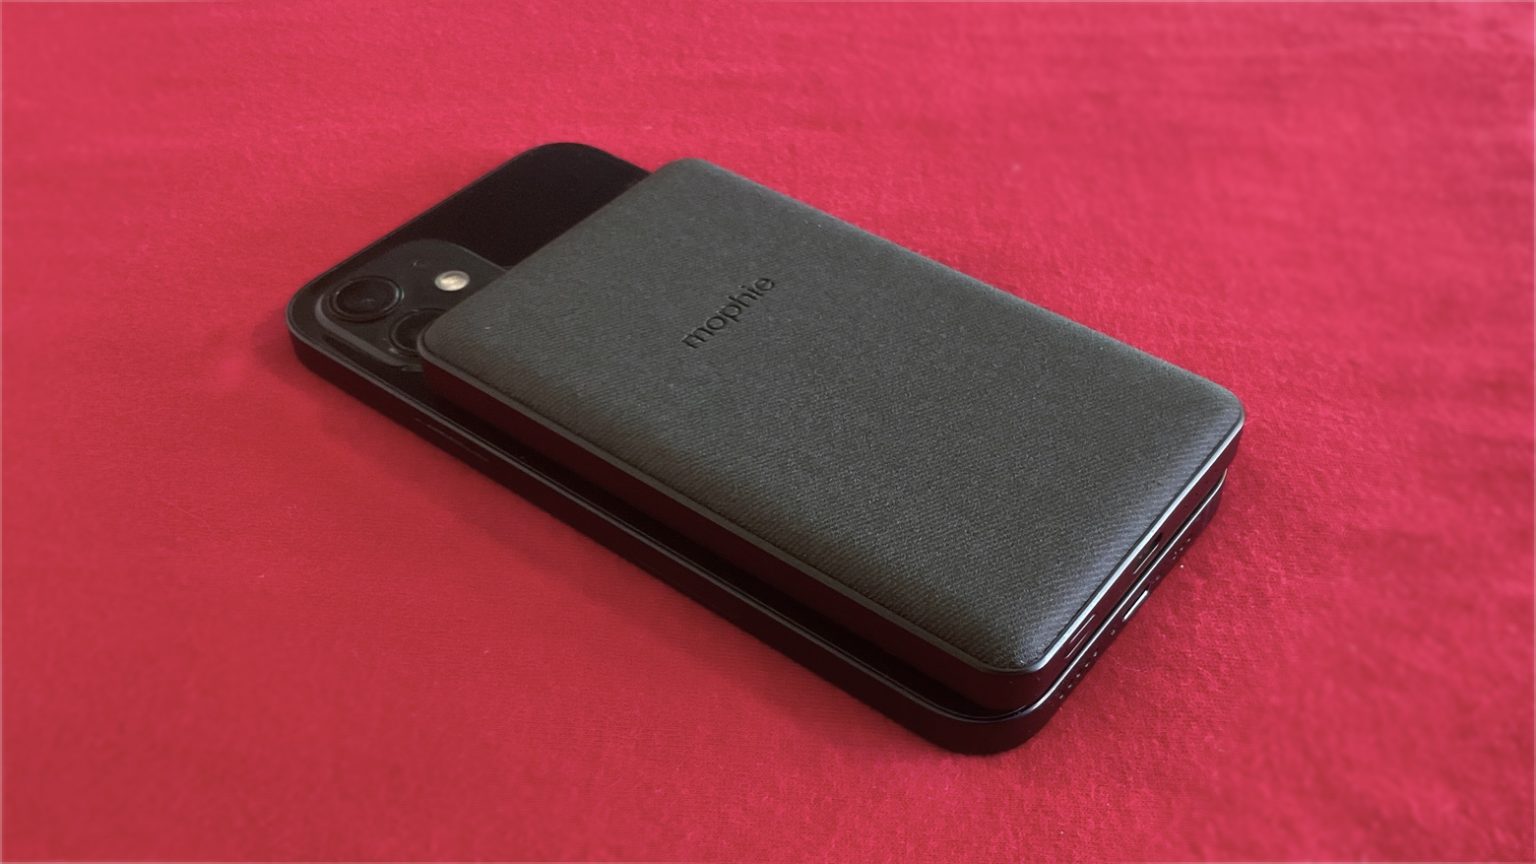 Mophie Snap+ Juice Pack Mini review